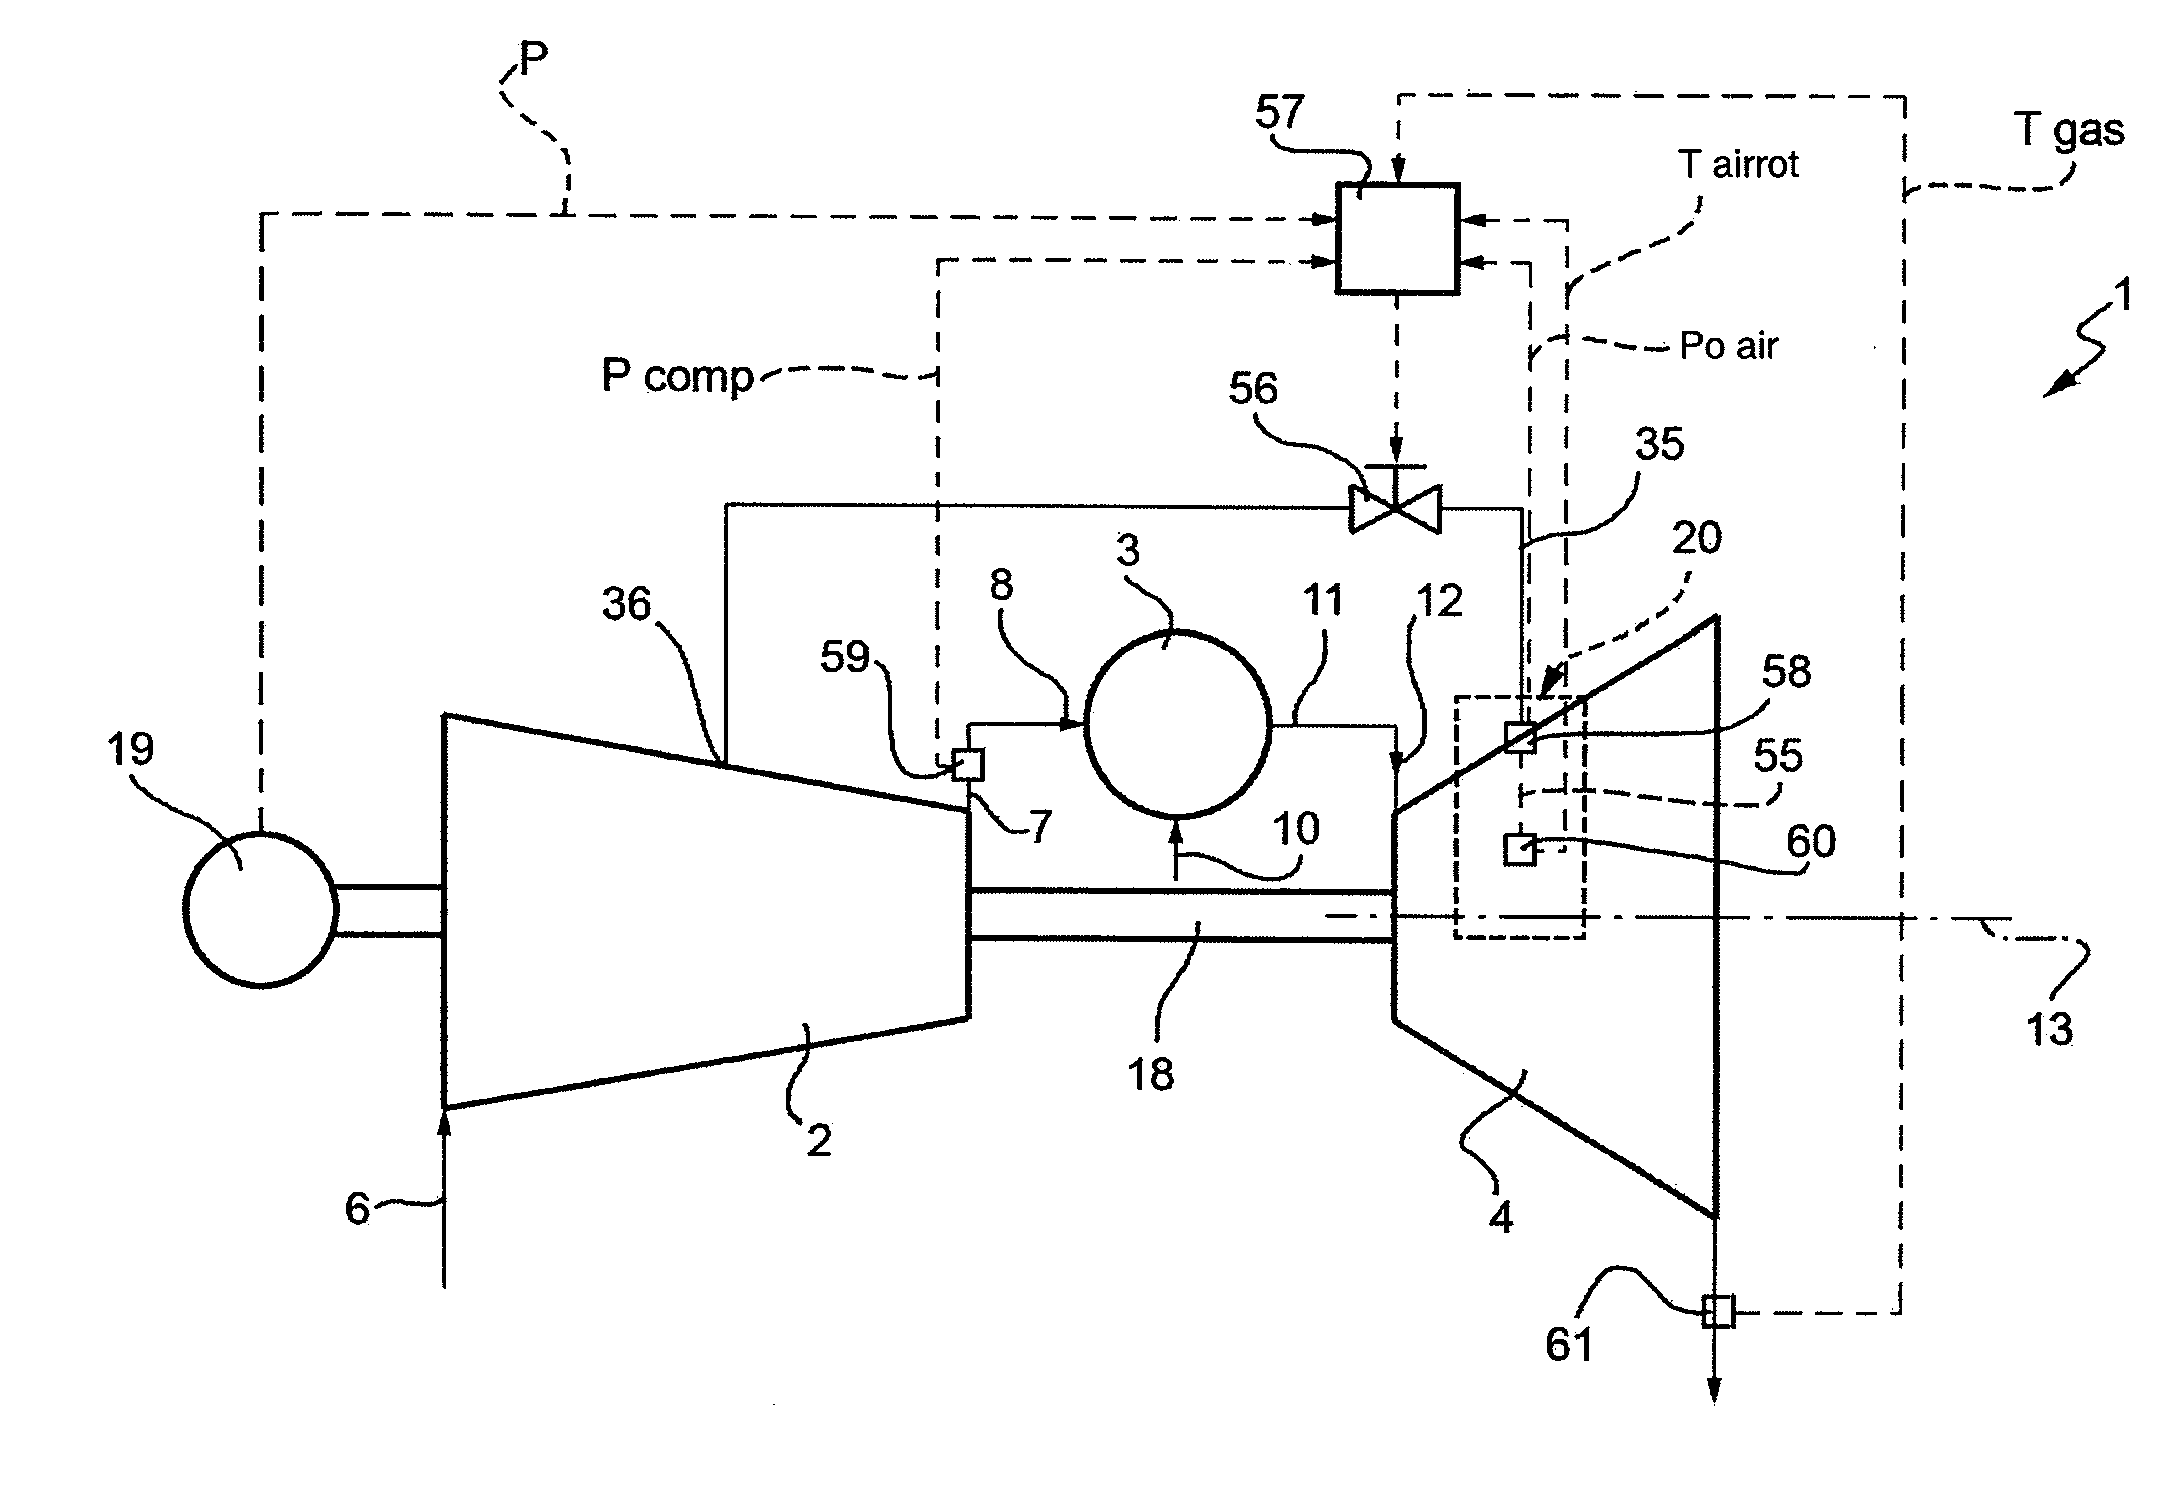 Control method for cooling a turbine stage in a gas turbine